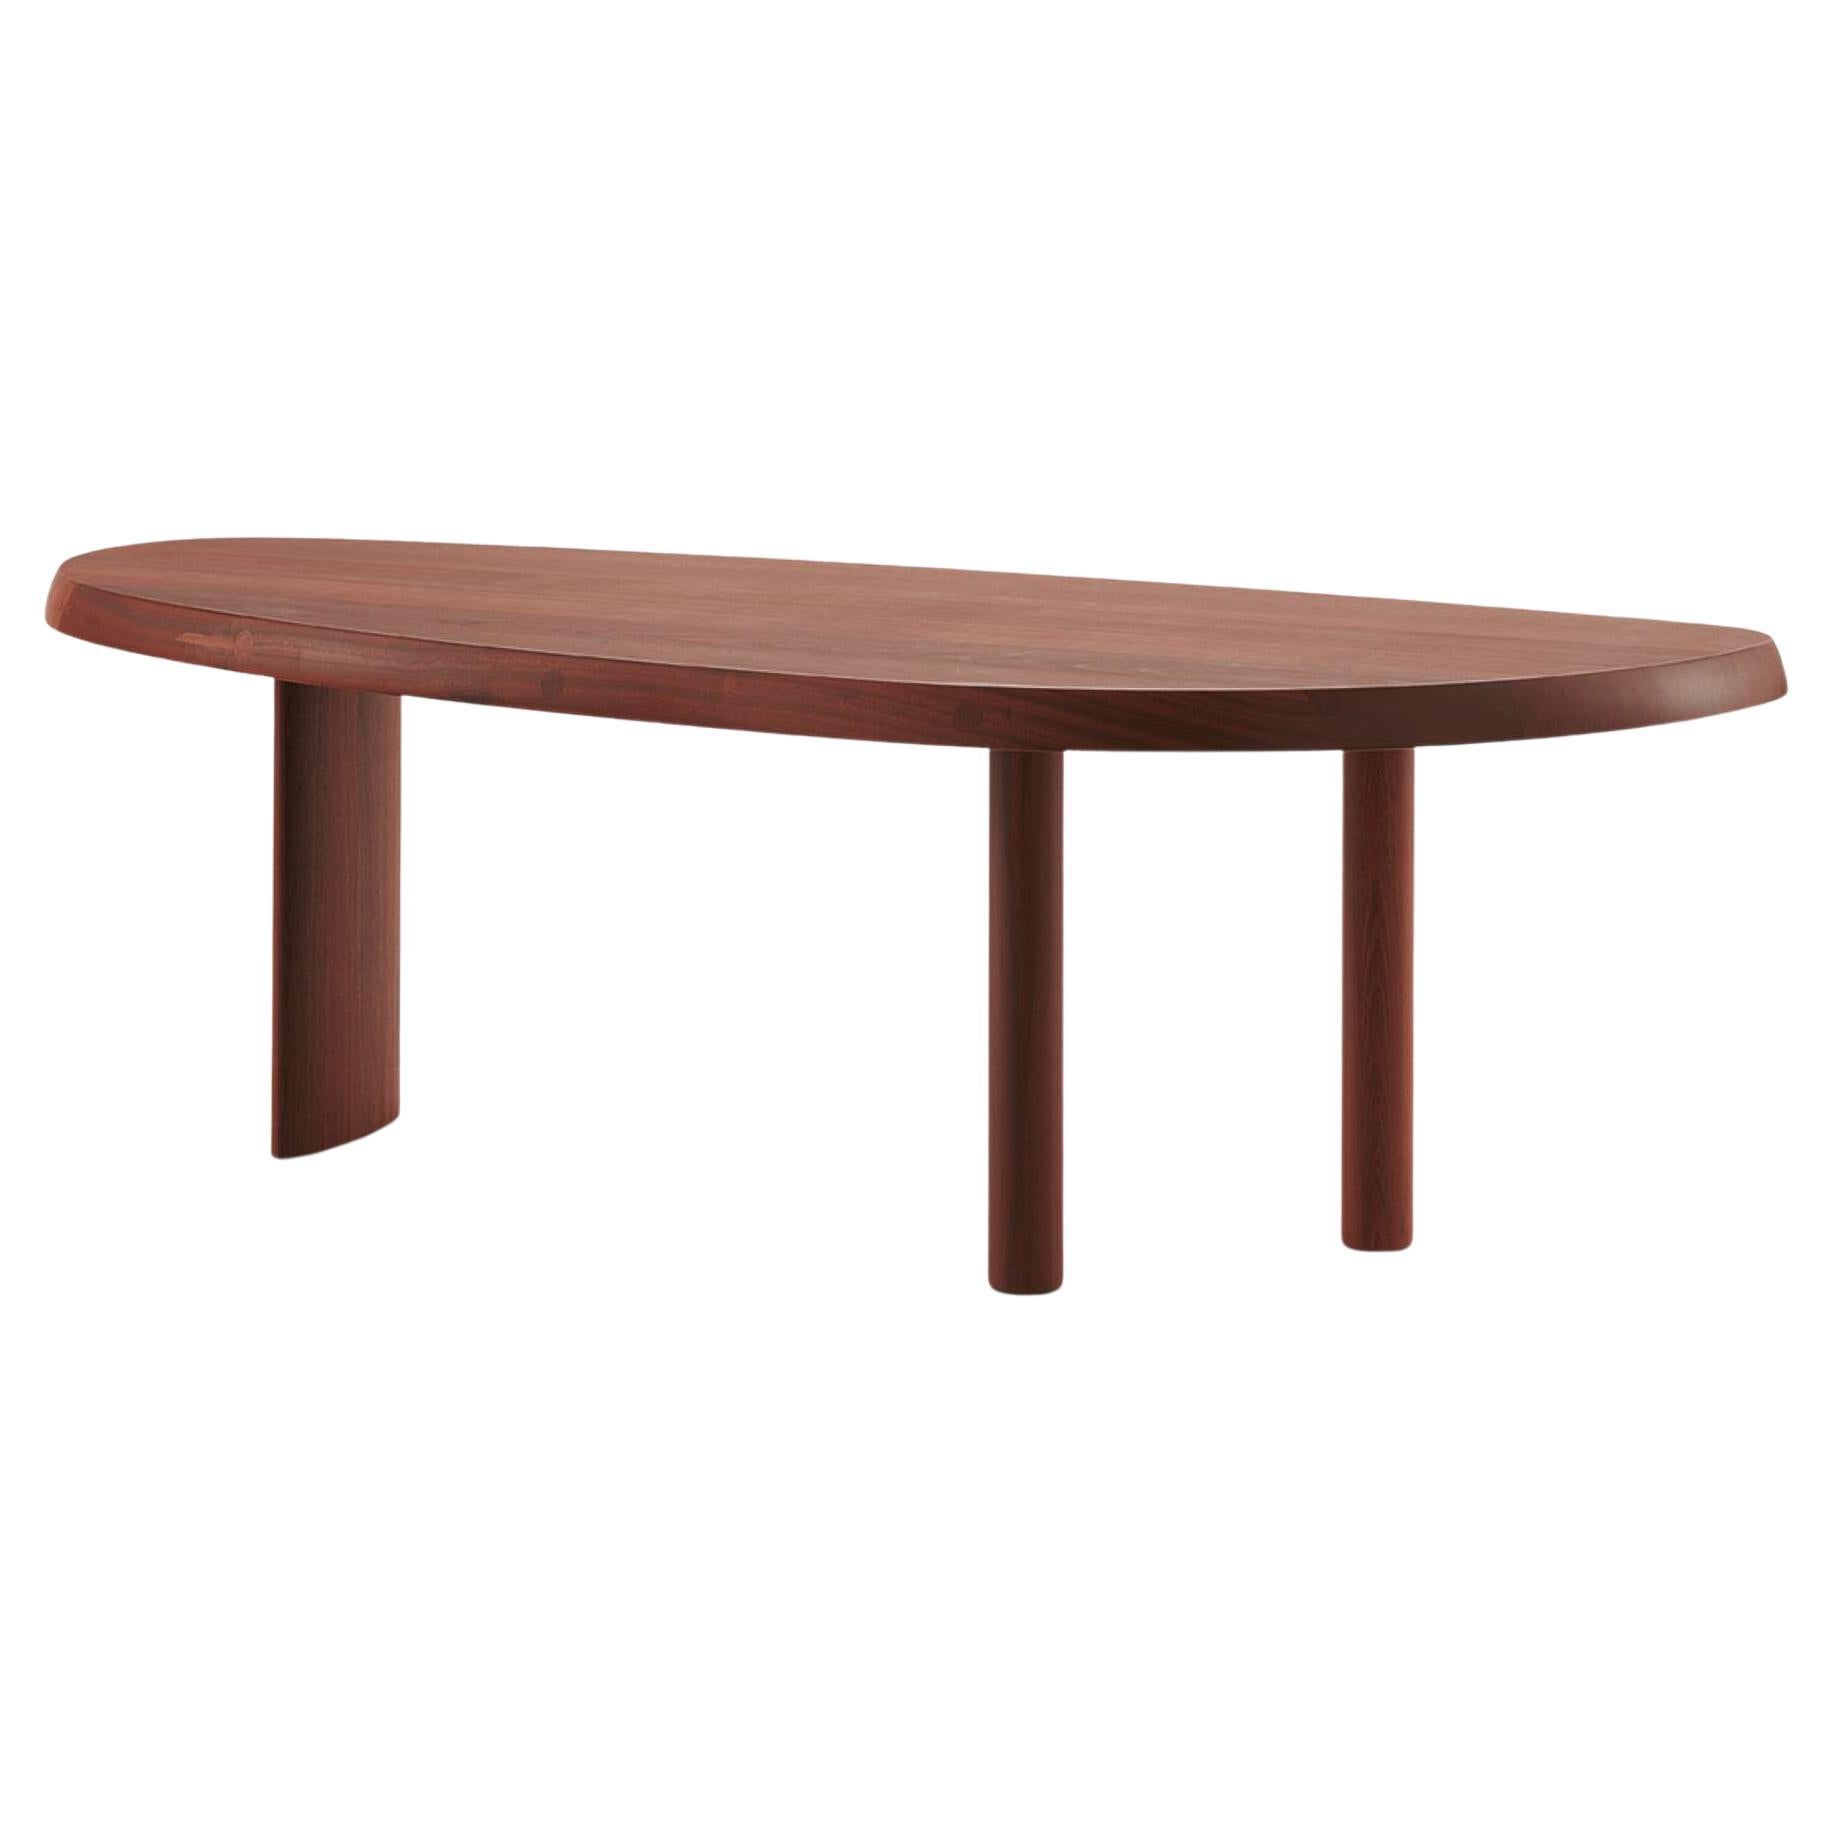 Huge Charlotte Perriand Table En Forme Libre for Cassina, Italy, 2022